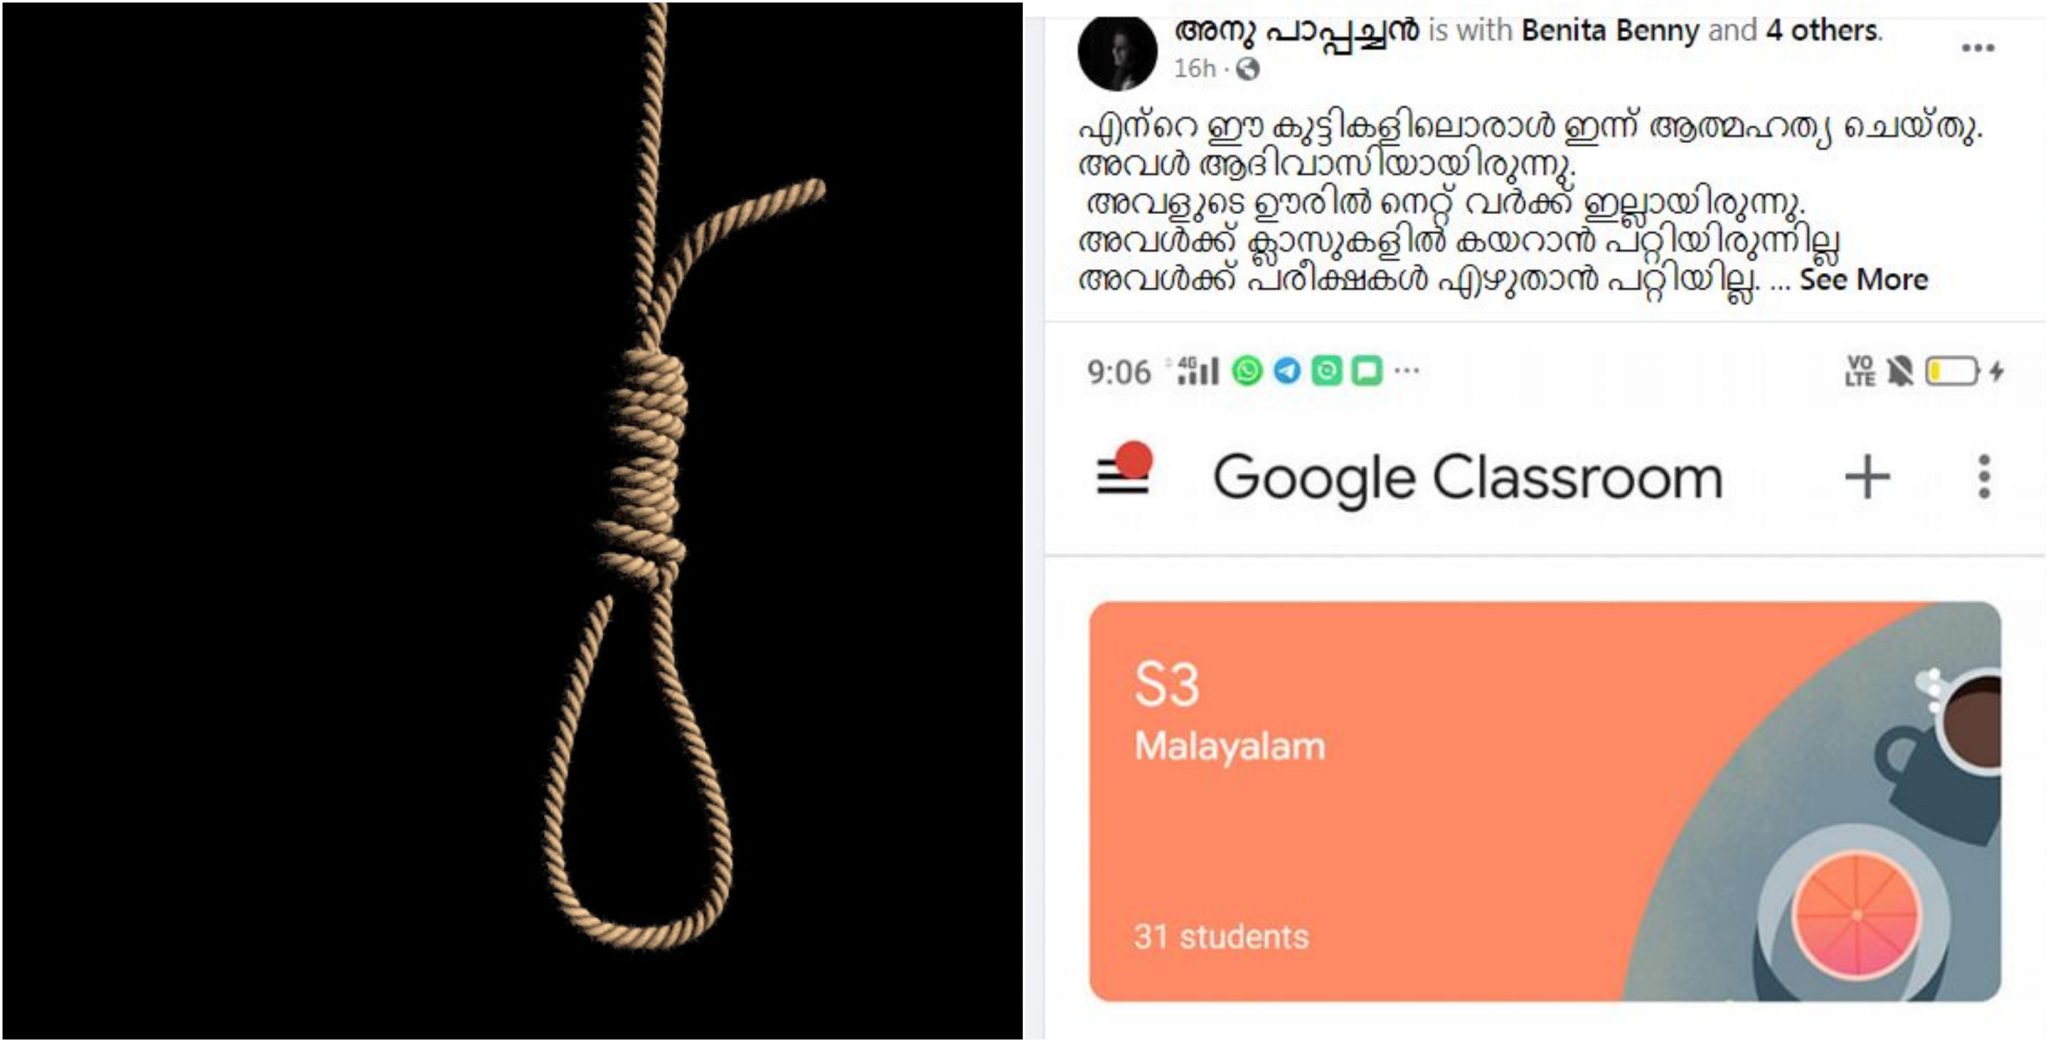 Tribal girl commit suicide due to lack of technical support to attend online classes